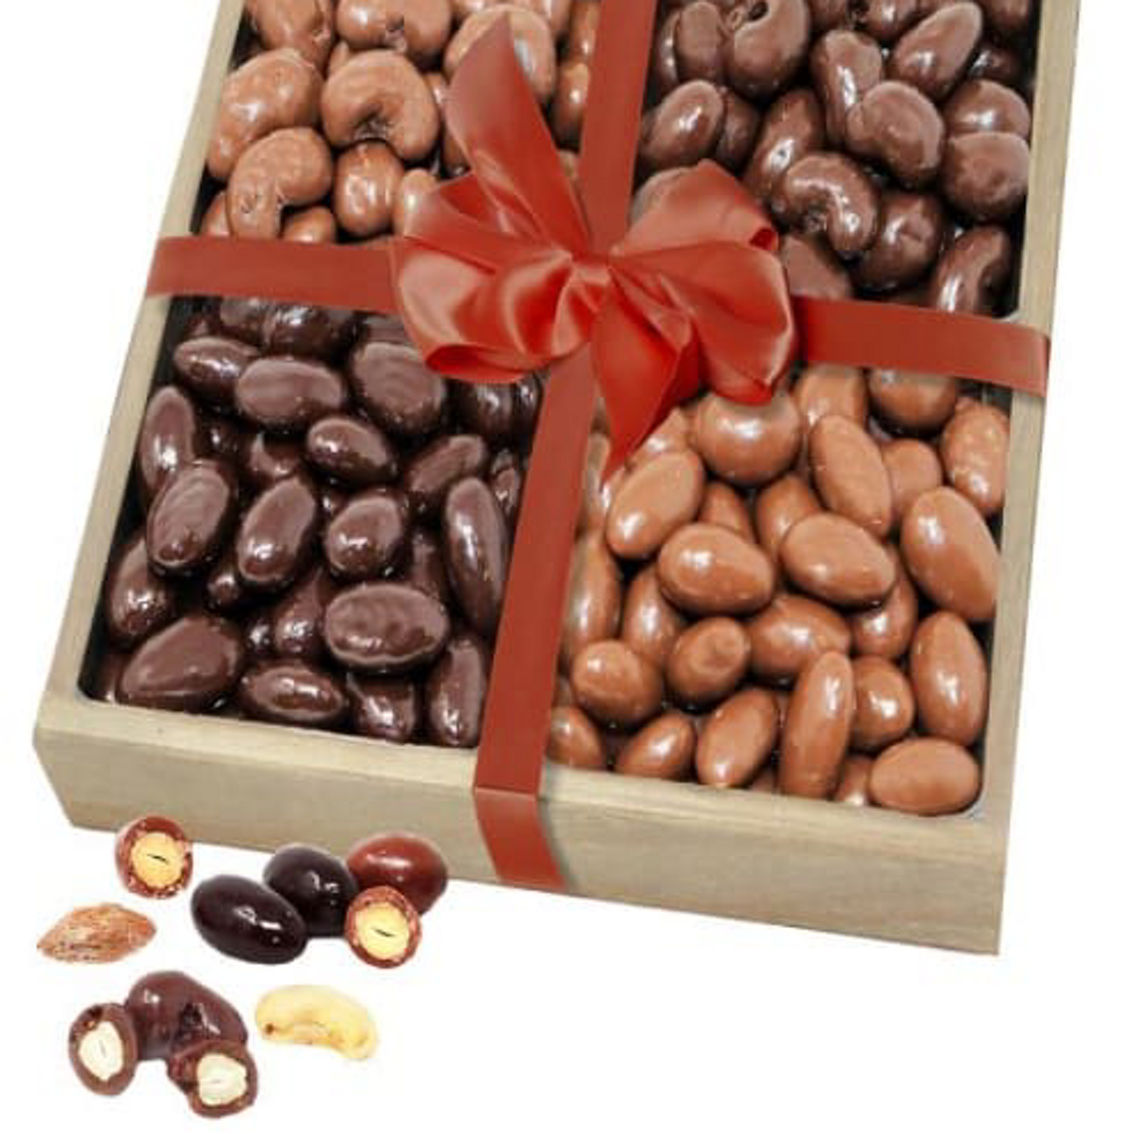 Deli Direct, Lillie & Pearl, Belgian Chocolate Covered Almond & Cashew Tray - Image 2 of 3